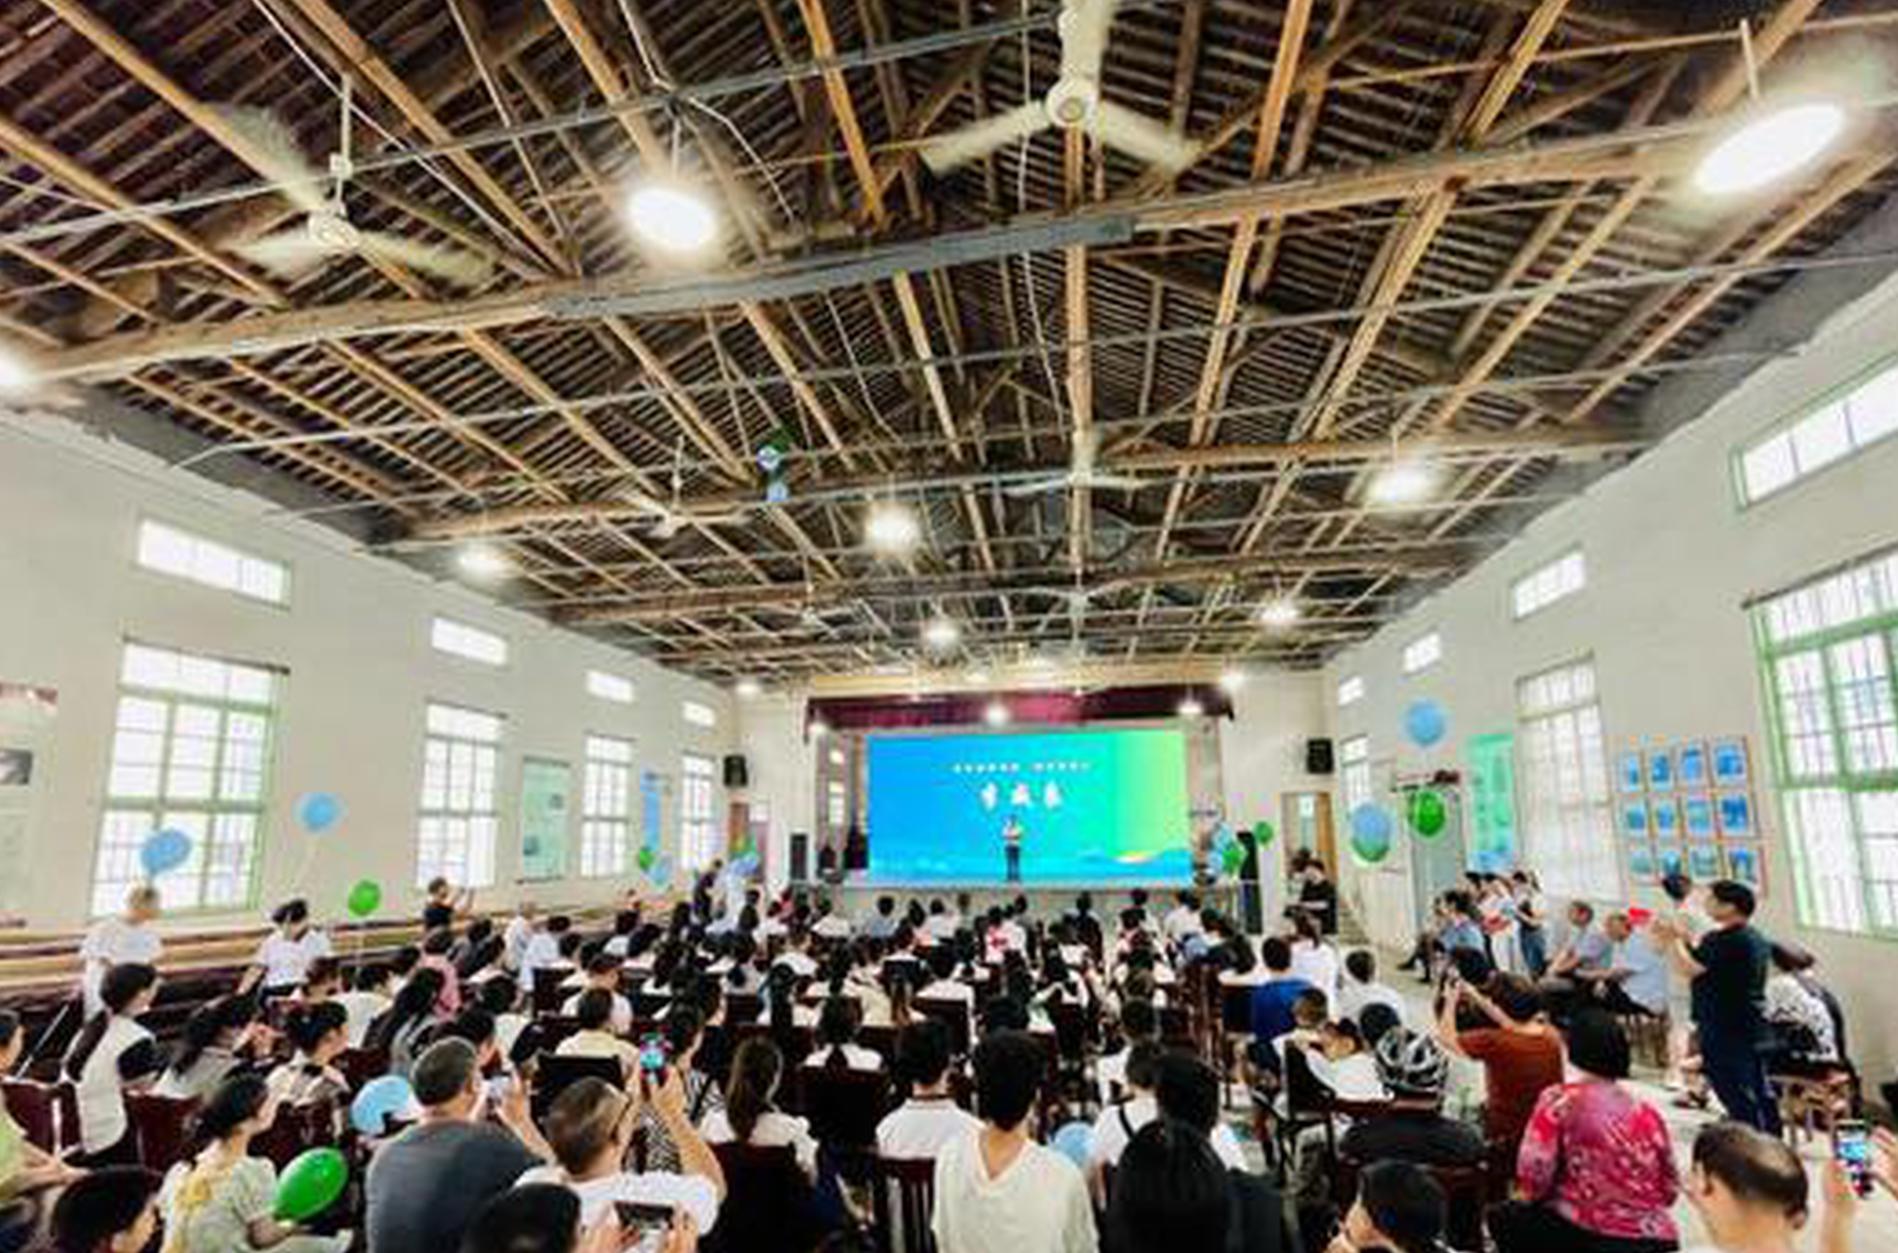 Youth-led education sessions in Zhejiang village foster balance, aspiration